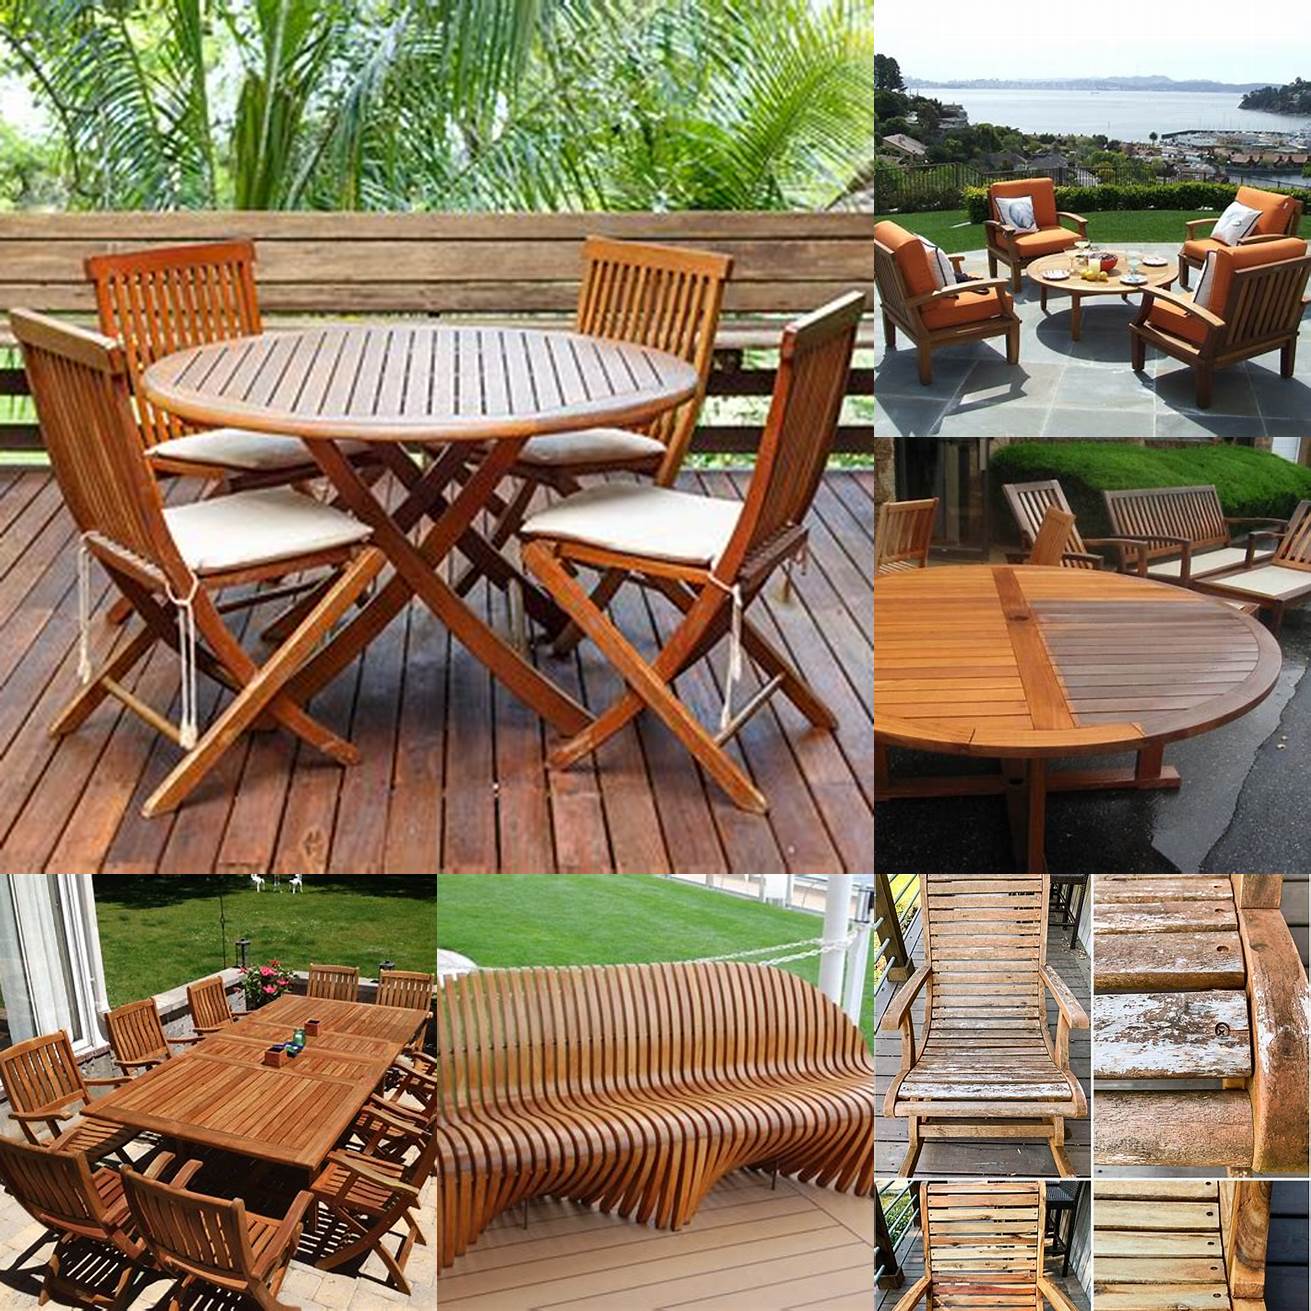 Avoid using teak furniture in areas where there is high humidity